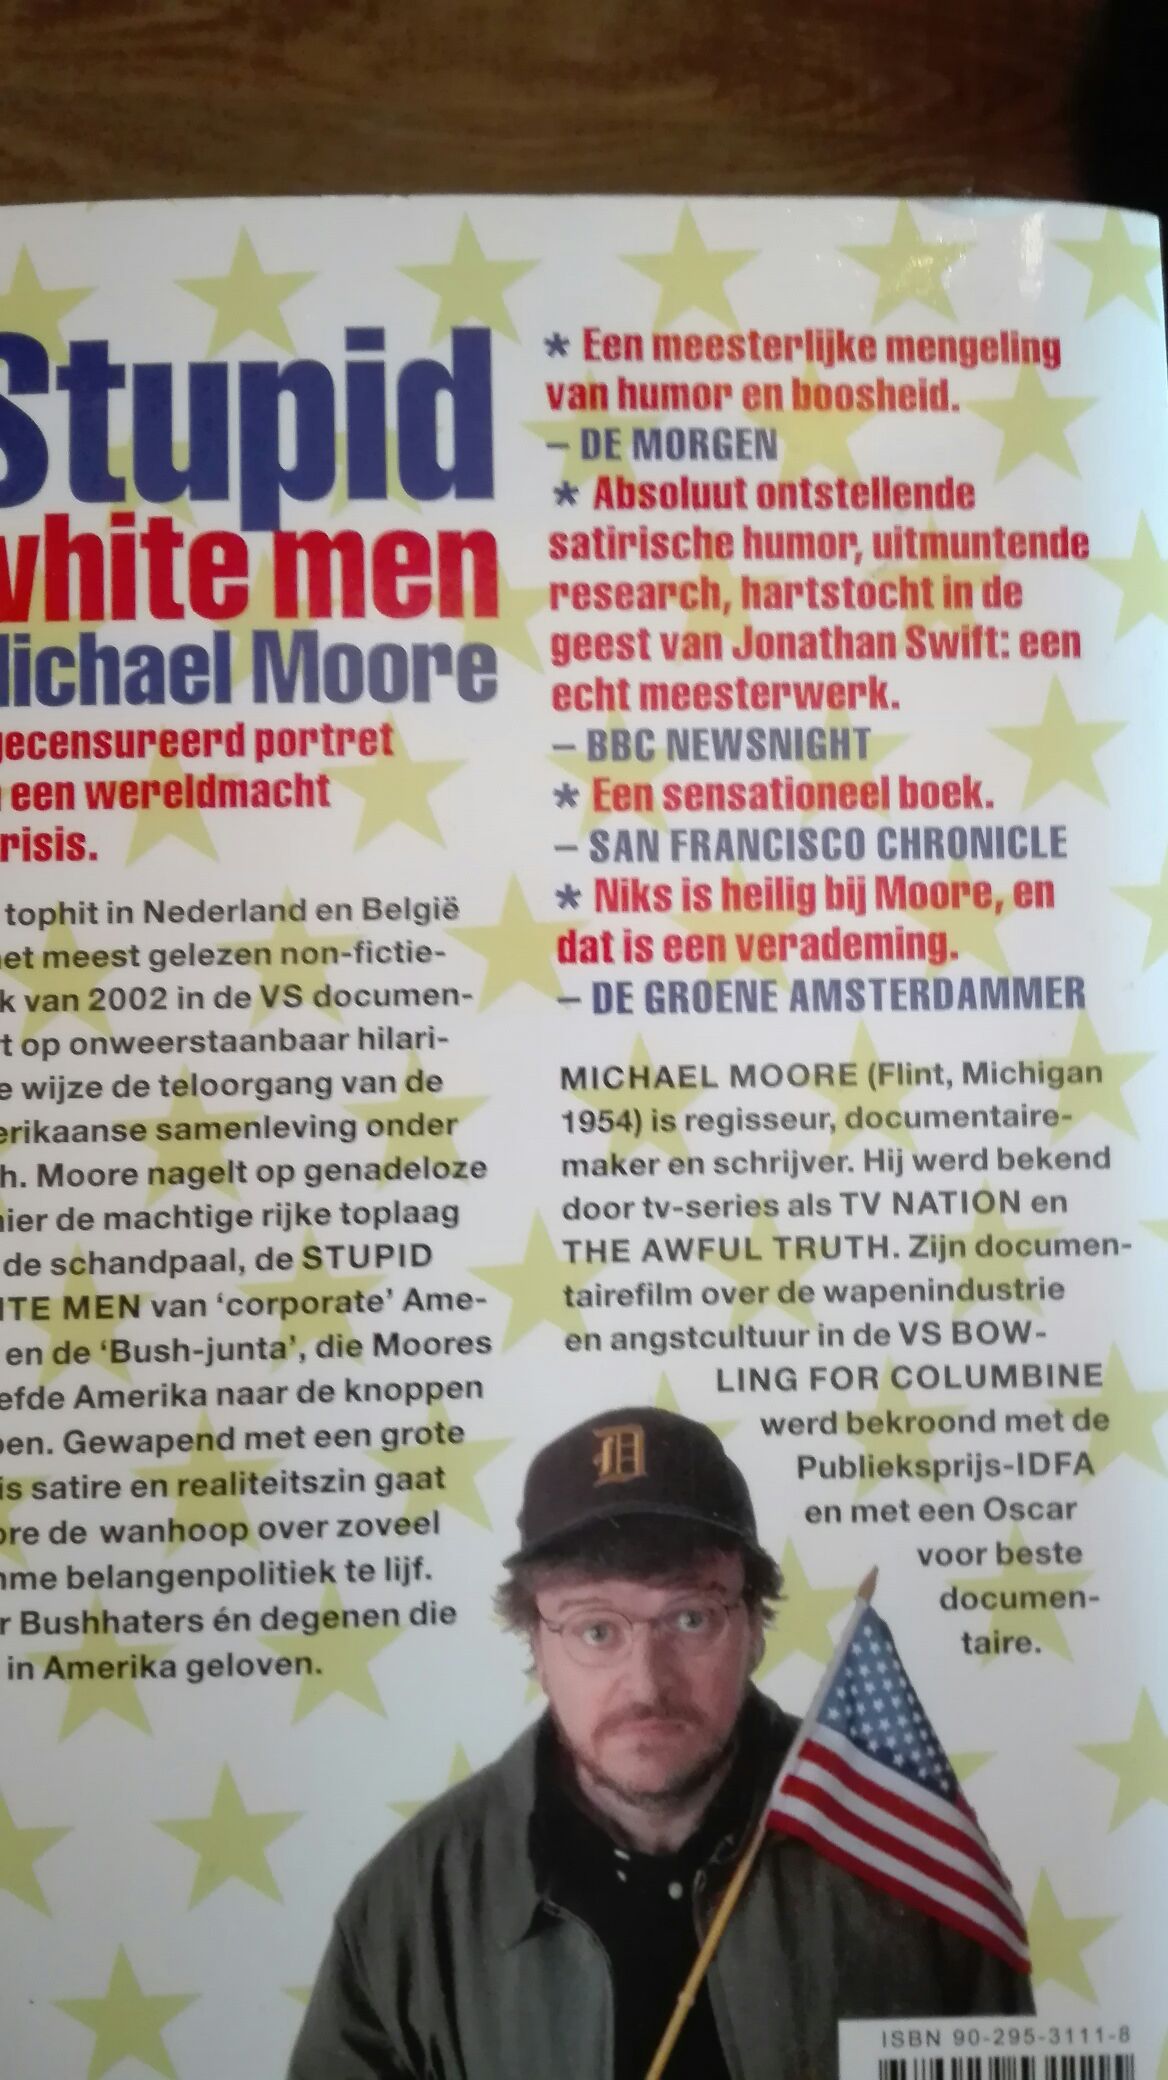 Stupid White Men - Michael Moore book collectible [Barcode 9789029531115] - Main Image 2